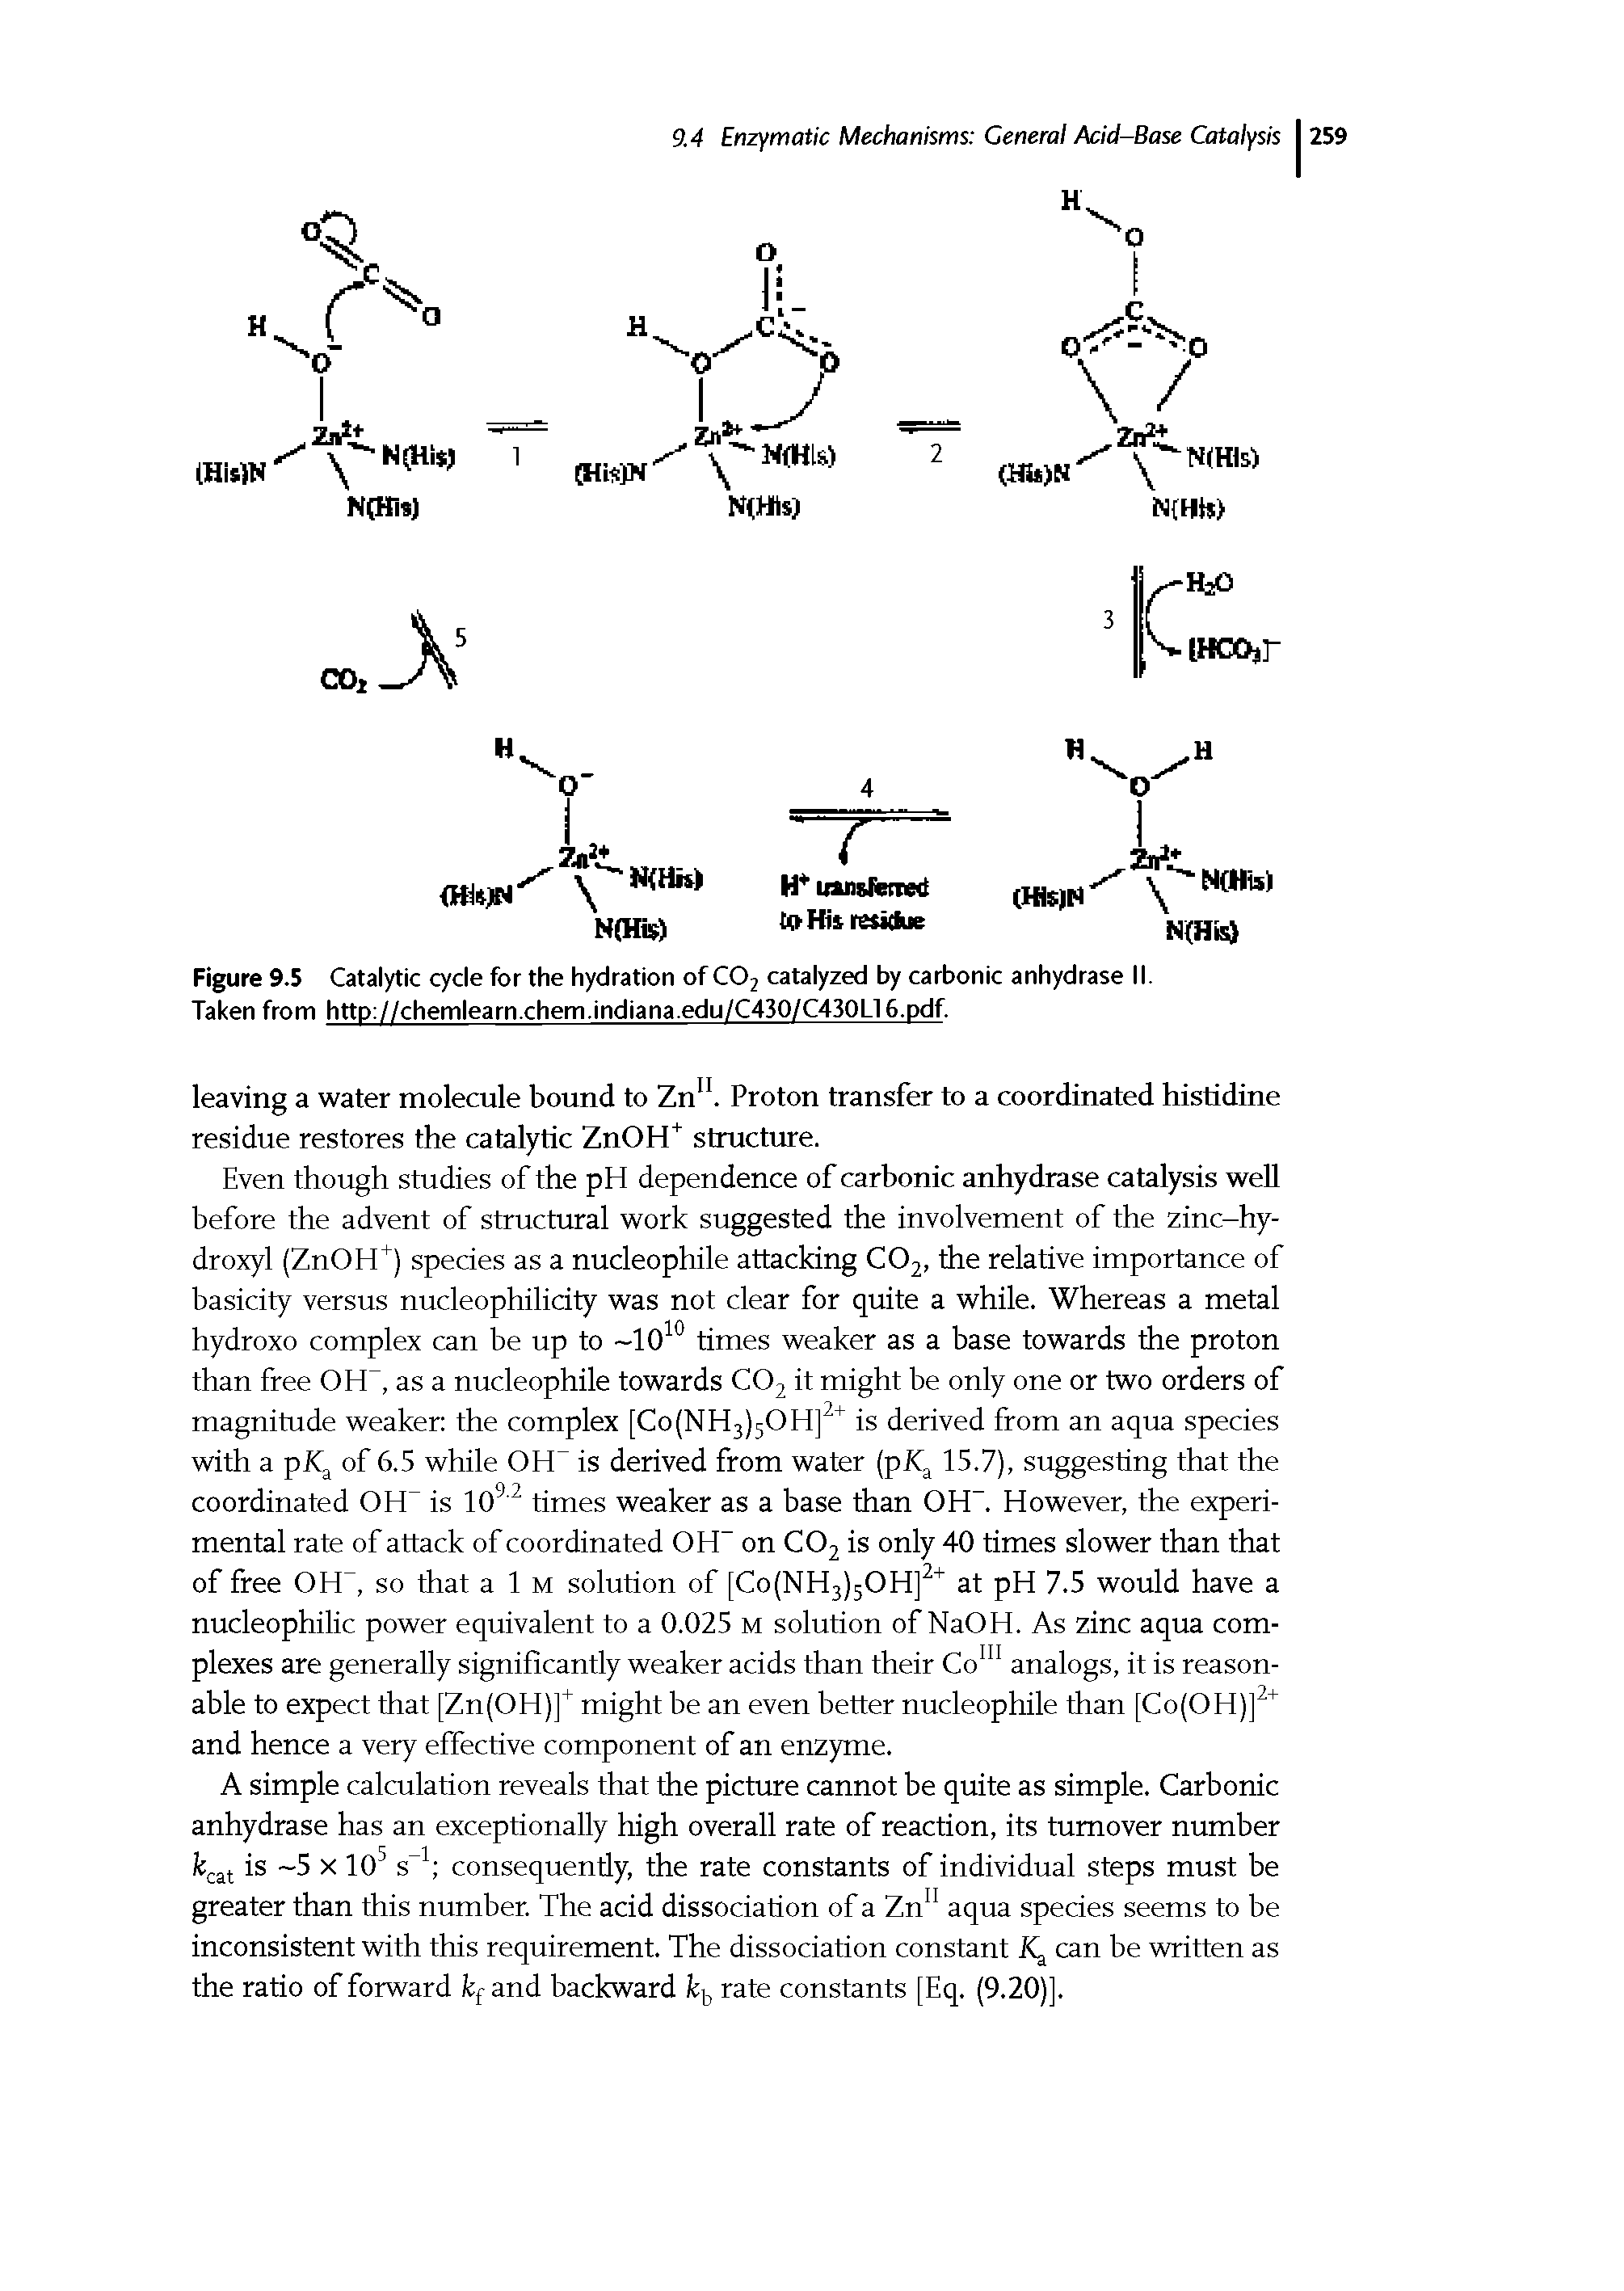 Figure 9.5 Catalytic cycle for the hydration of C02 catalyzed by carbonic anhydrase II. Taken from http //chemlearn.chem.indiana.edu/C430/C430L16.pdf.